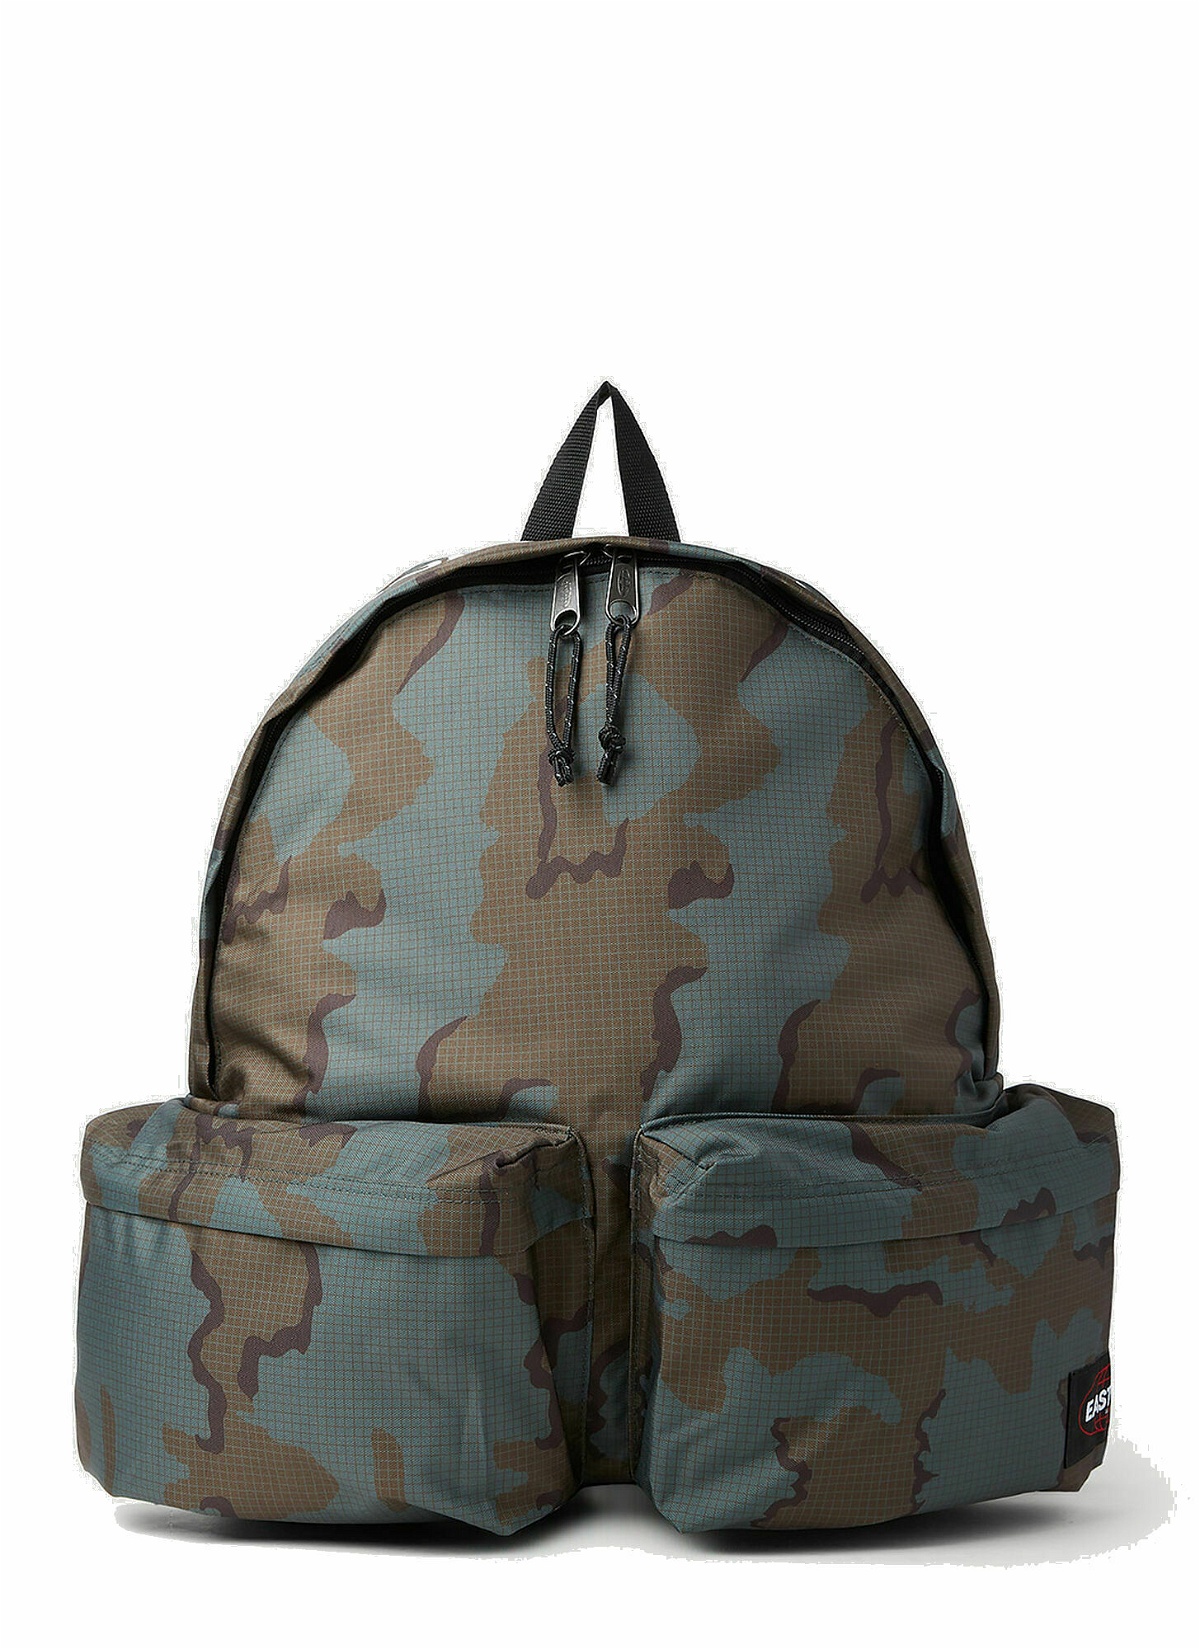 Photo: Eastpak x UNDERCOVER - Camouflage Backpack in Khaki